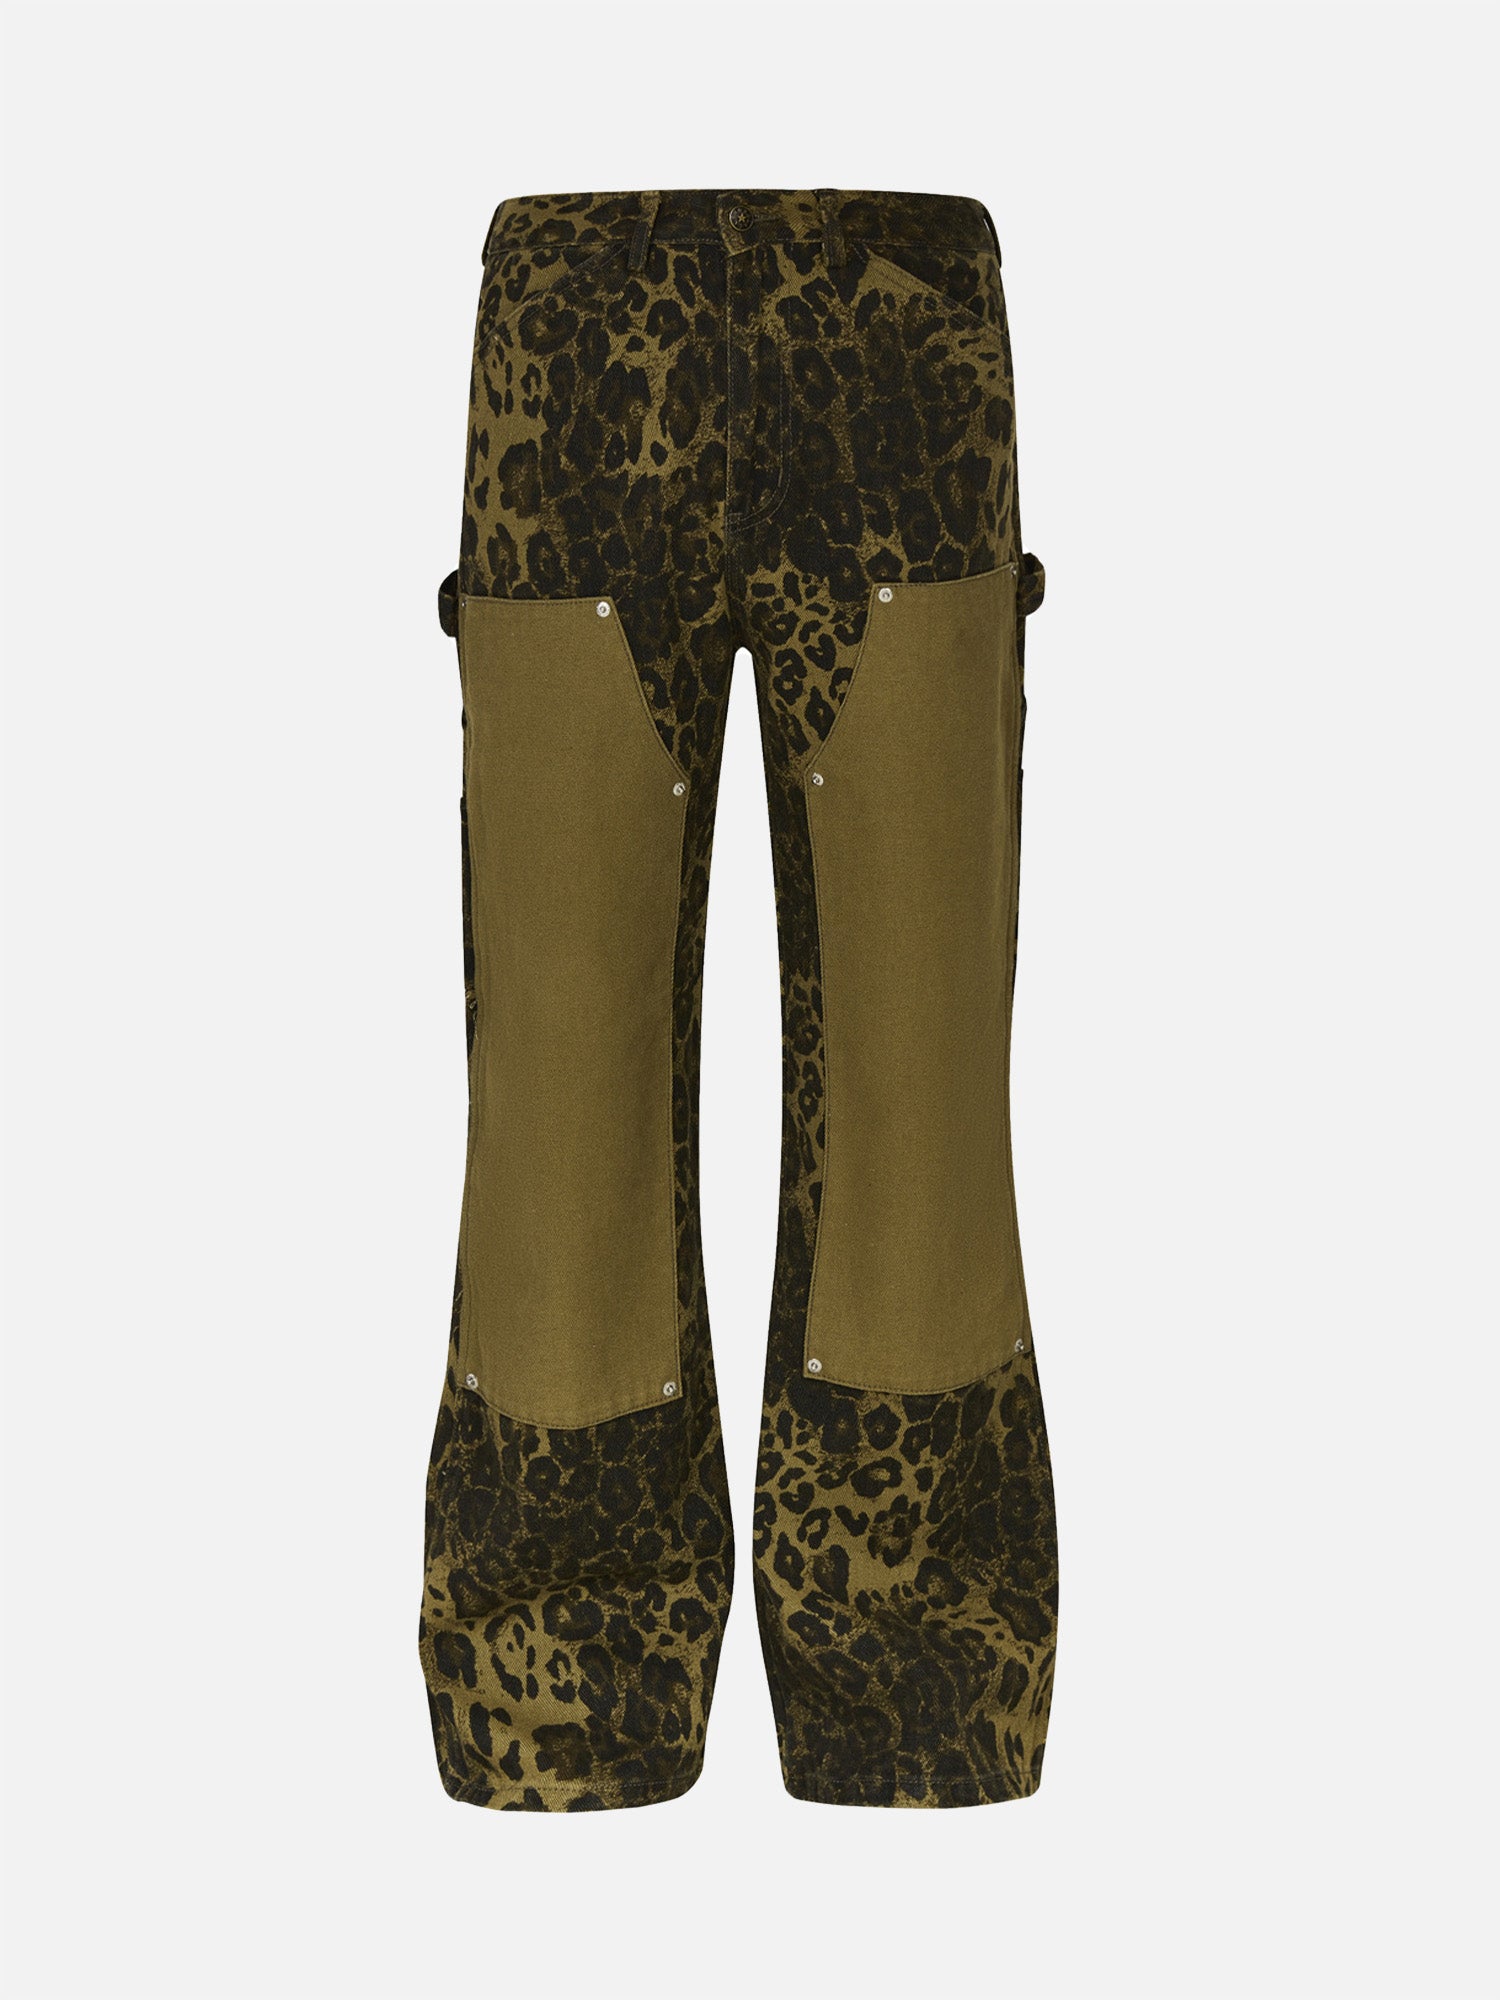 Thesupermade Patchwork Workwear Logging Straight-leg Leopard Print Casual Pants